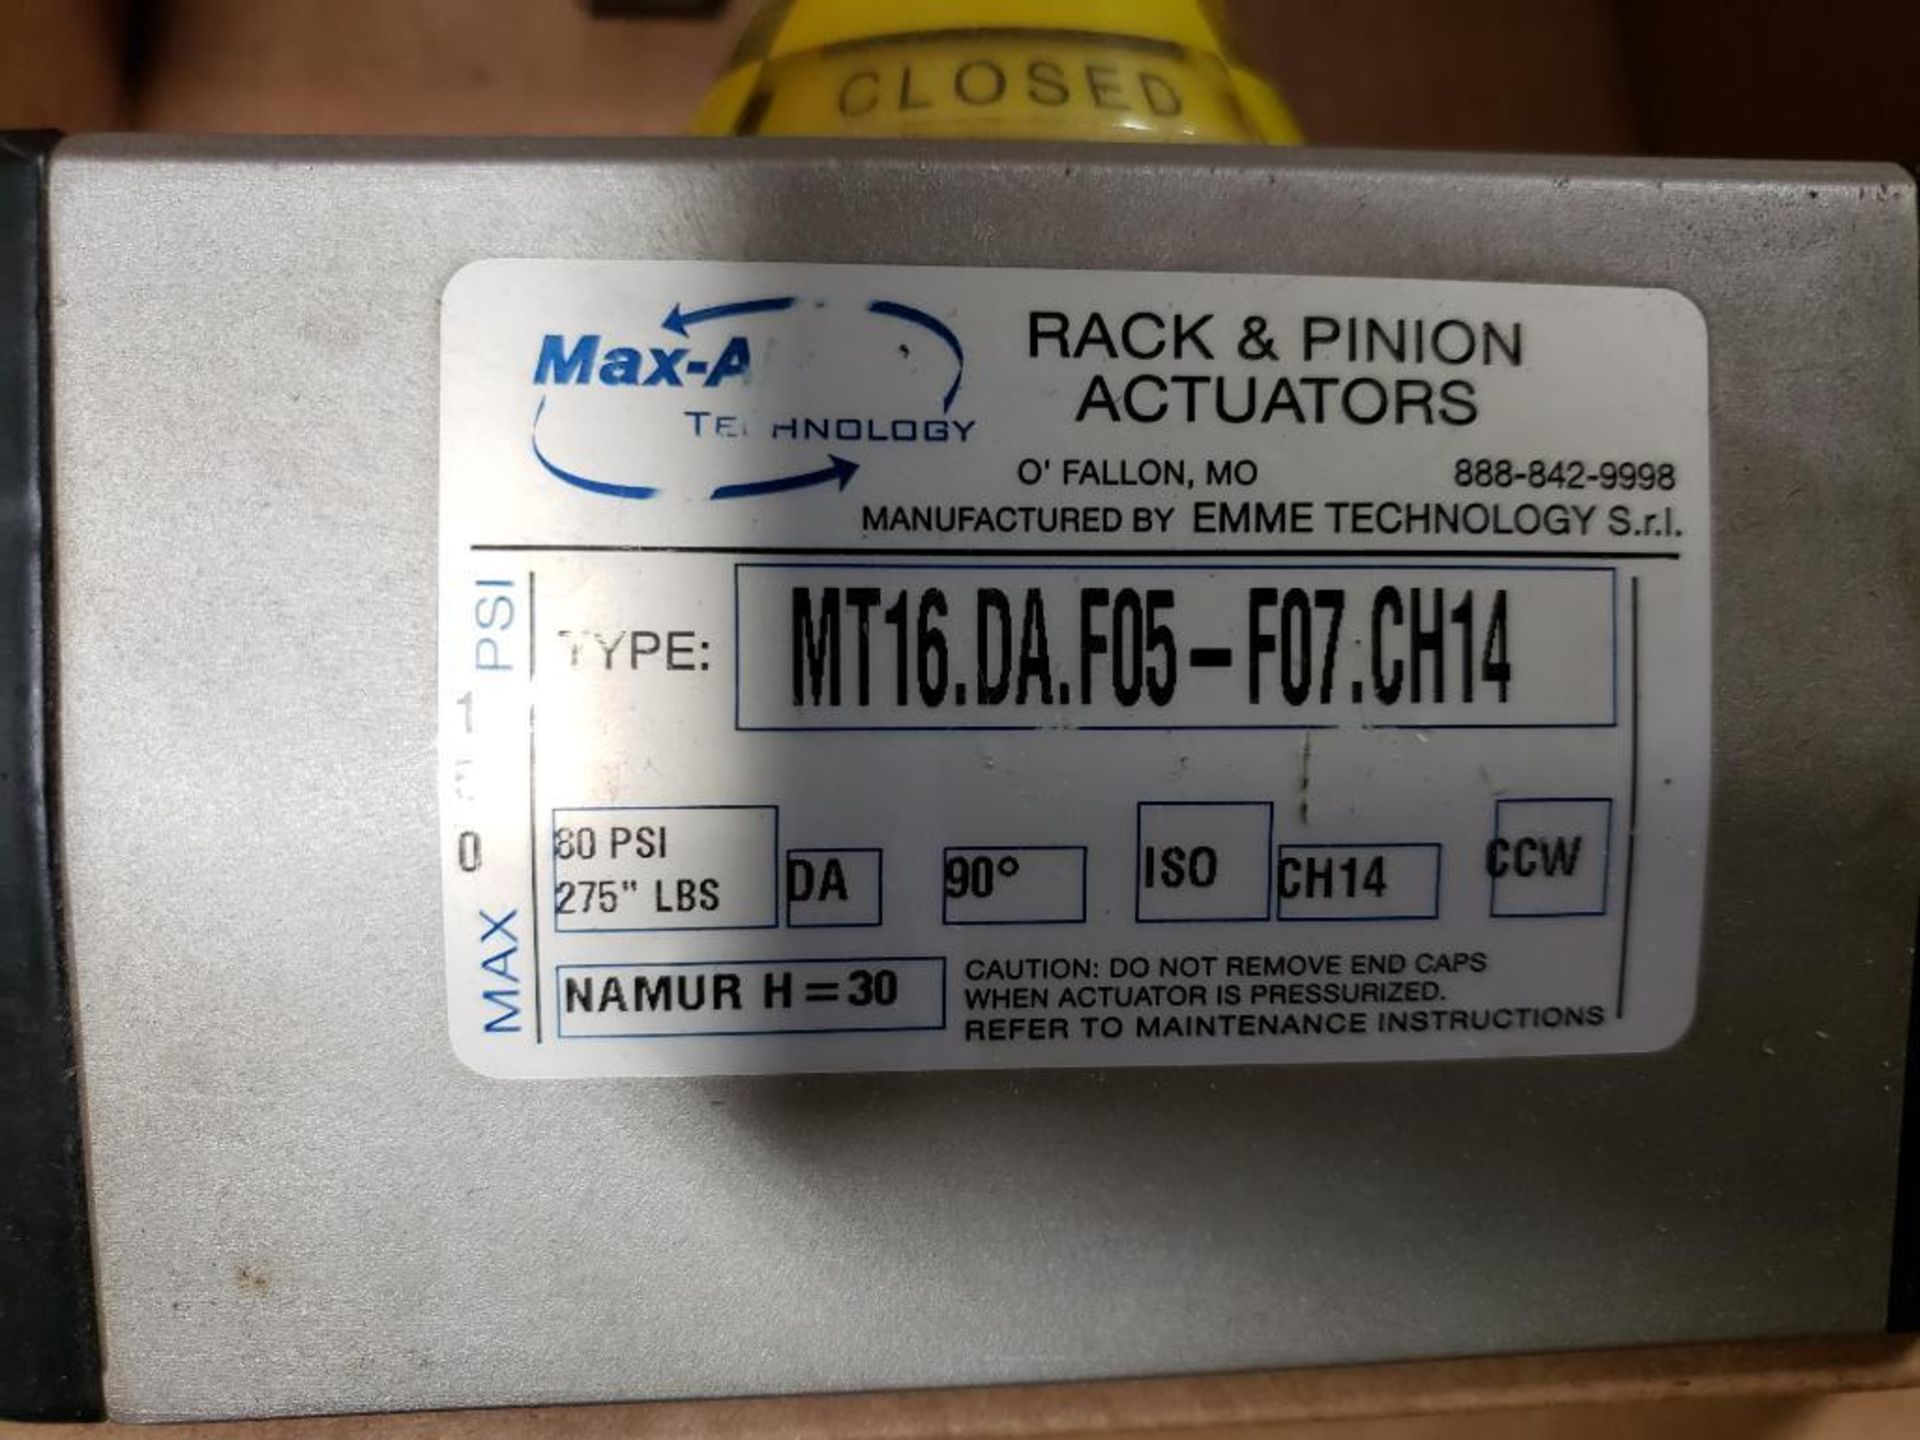 Qty 2 - Max A technology rack and pinion actuator. MT16.DA.F05-F07.CH14. - Image 3 of 7